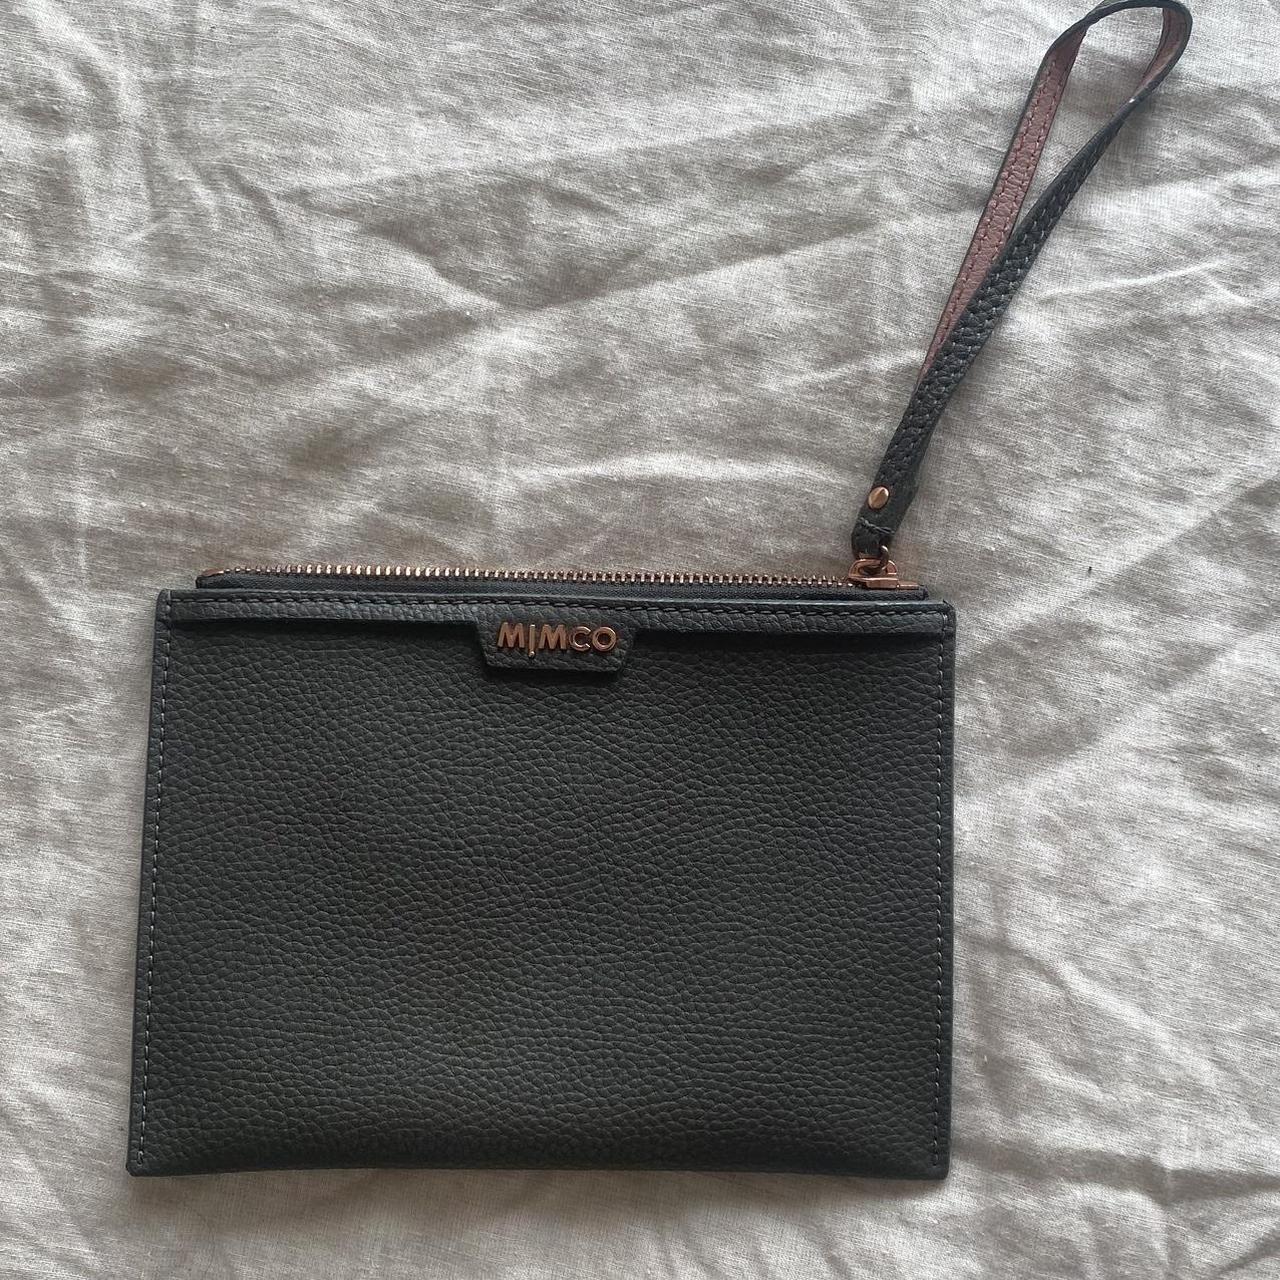 Mimco leather pouch - Depop